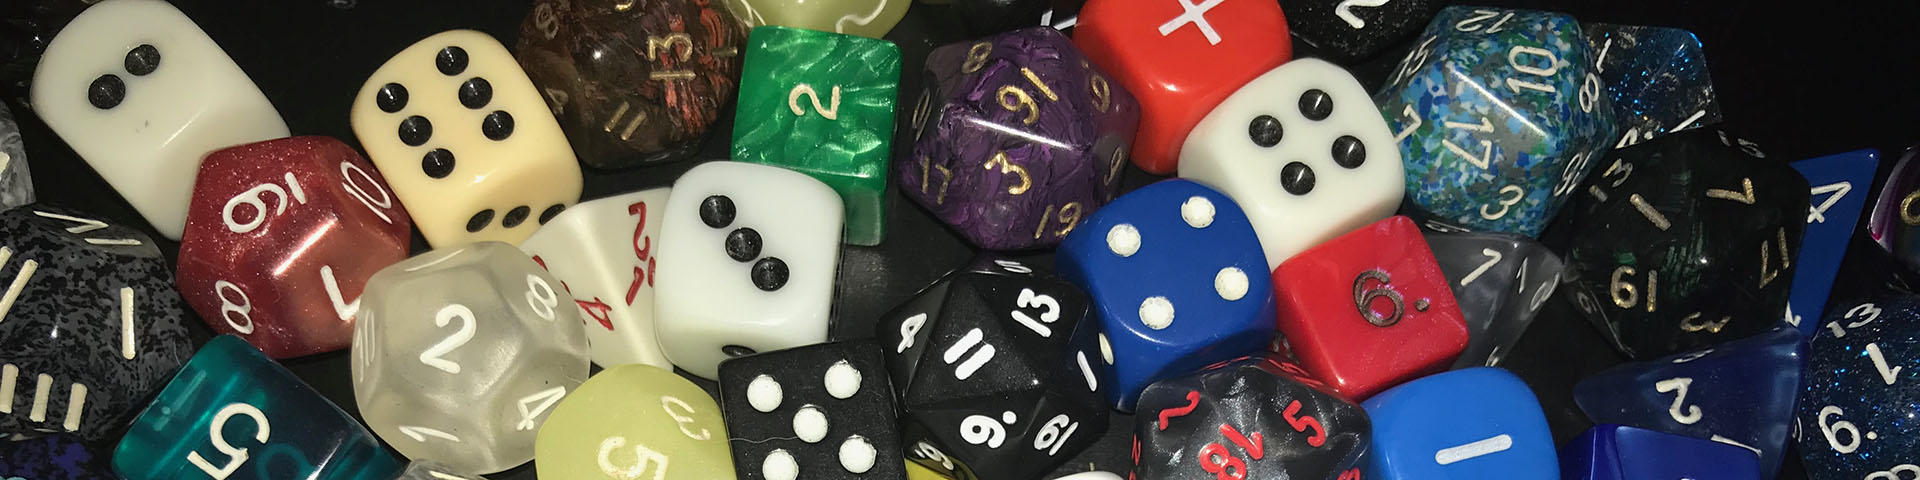 A collection of dice of different size and colors.